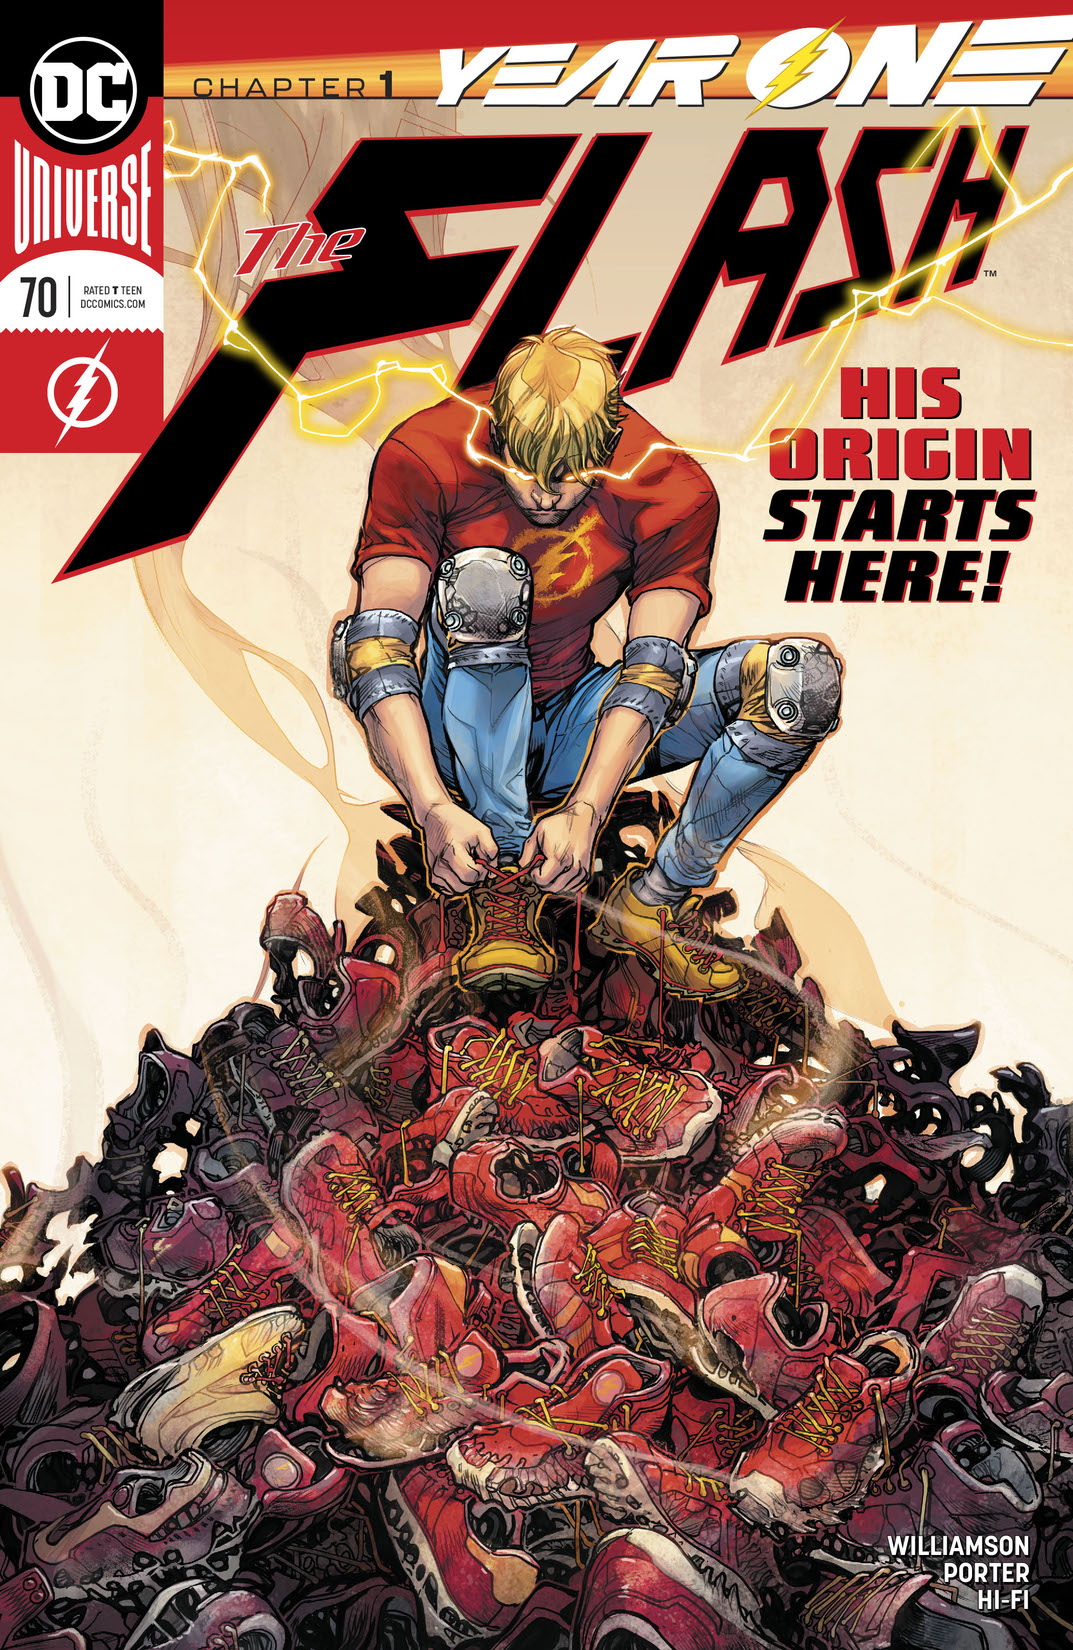 The Flash (2016-) #70 preview images